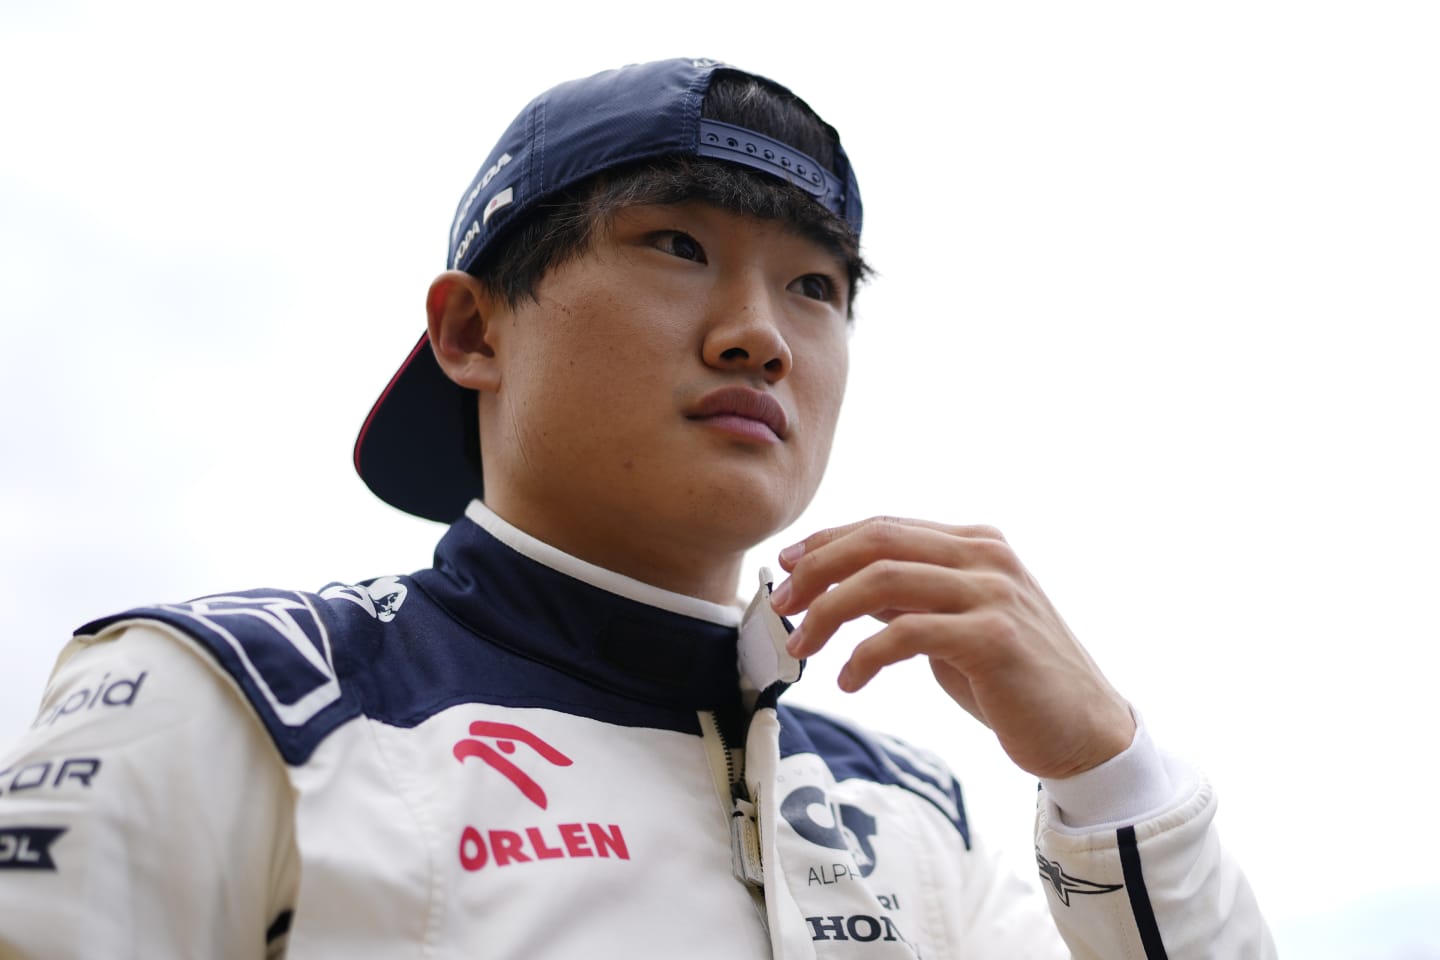 MONTREAL, QUEBEC - JUNE 18: Yuki Tsunoda of Japan and Scuderia AlphaTauri prepares to drive on the grid during the F1 Grand Prix of Canada at Circuit Gilles Villeneuve on June 18, 2023 in Montreal, Quebec. (Photo by Rudy Carezzevoli/Getty Images)